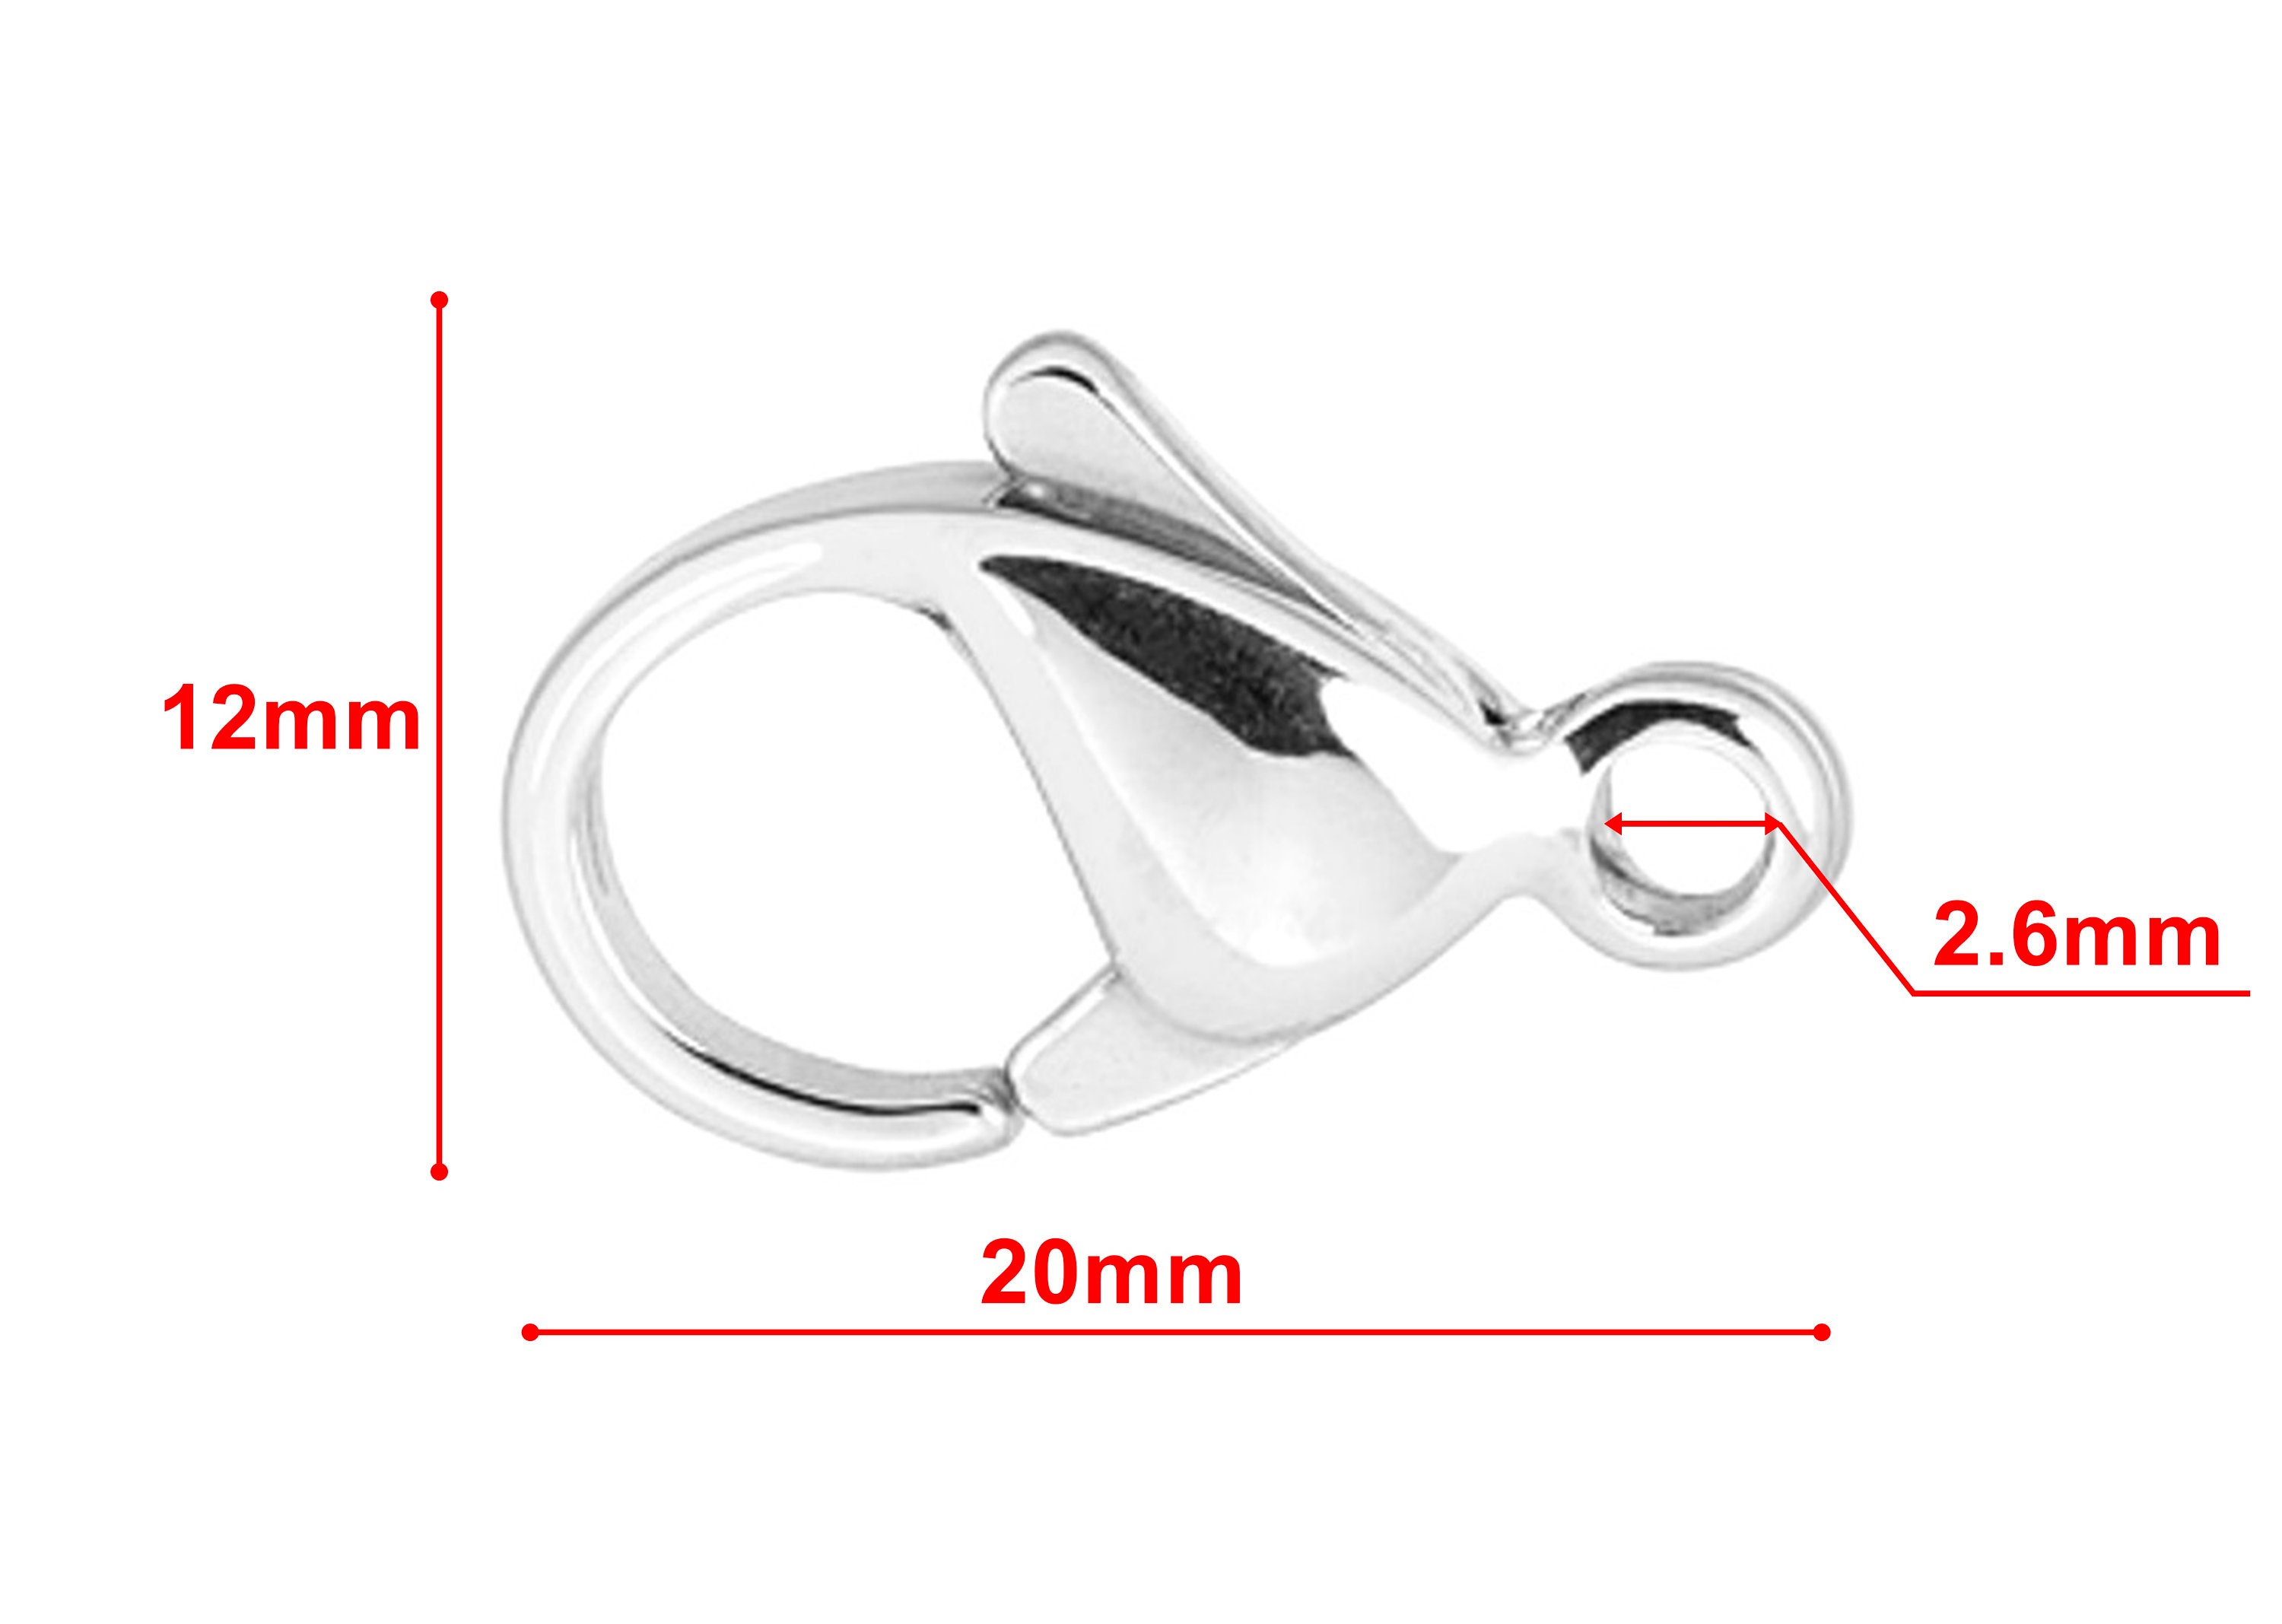 Lobster Claw Clasp 15x9mm Surgical Stainless Steel (1-Pc)